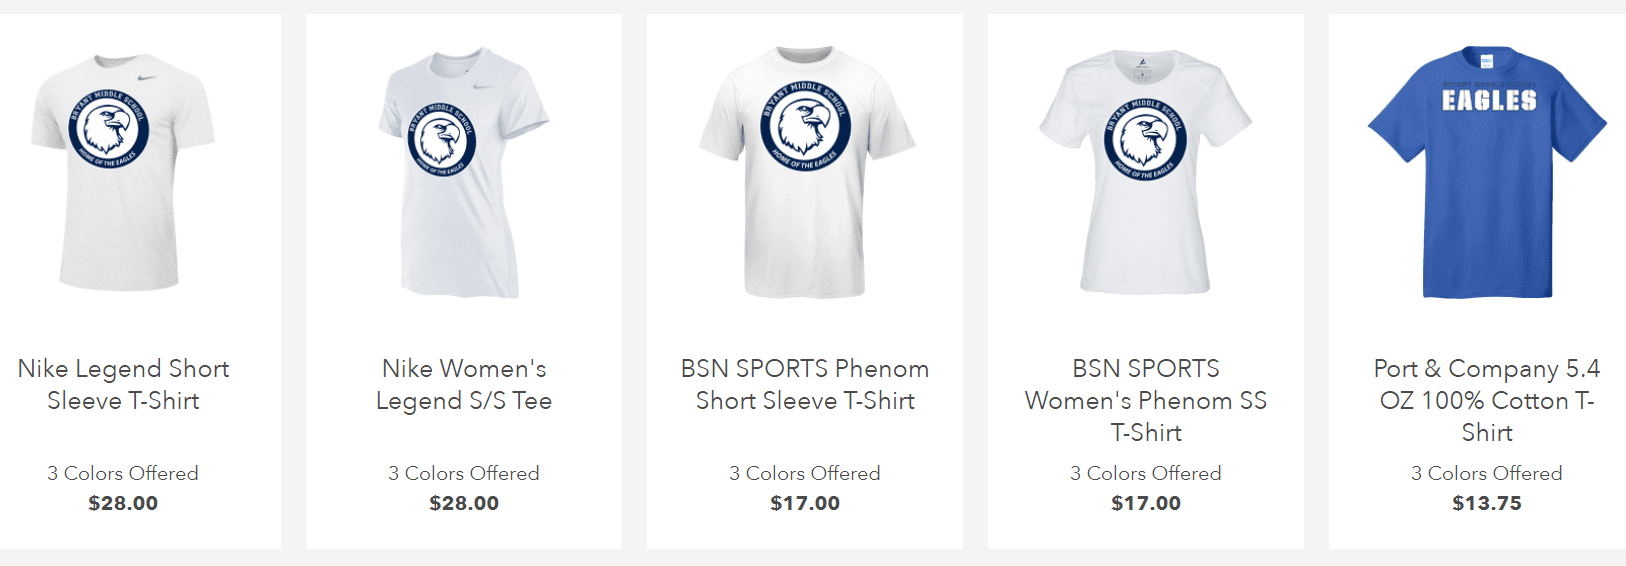 Bryant Apparel for Sale at the Online “Swag” Store!